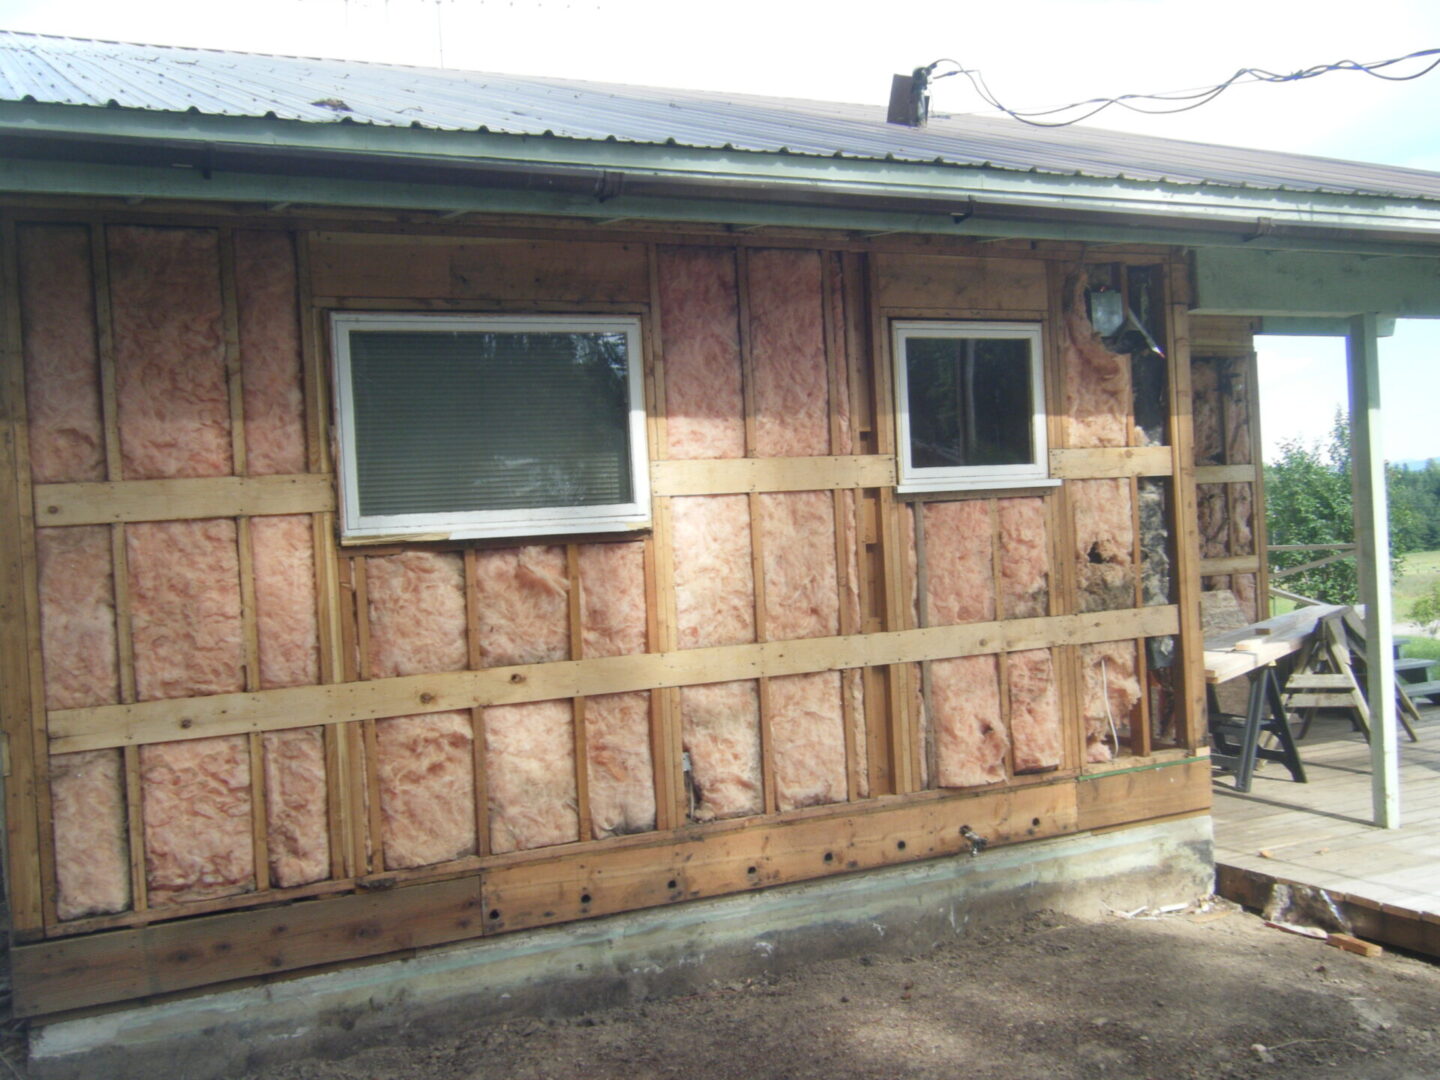 Front view of house walls being remodeled